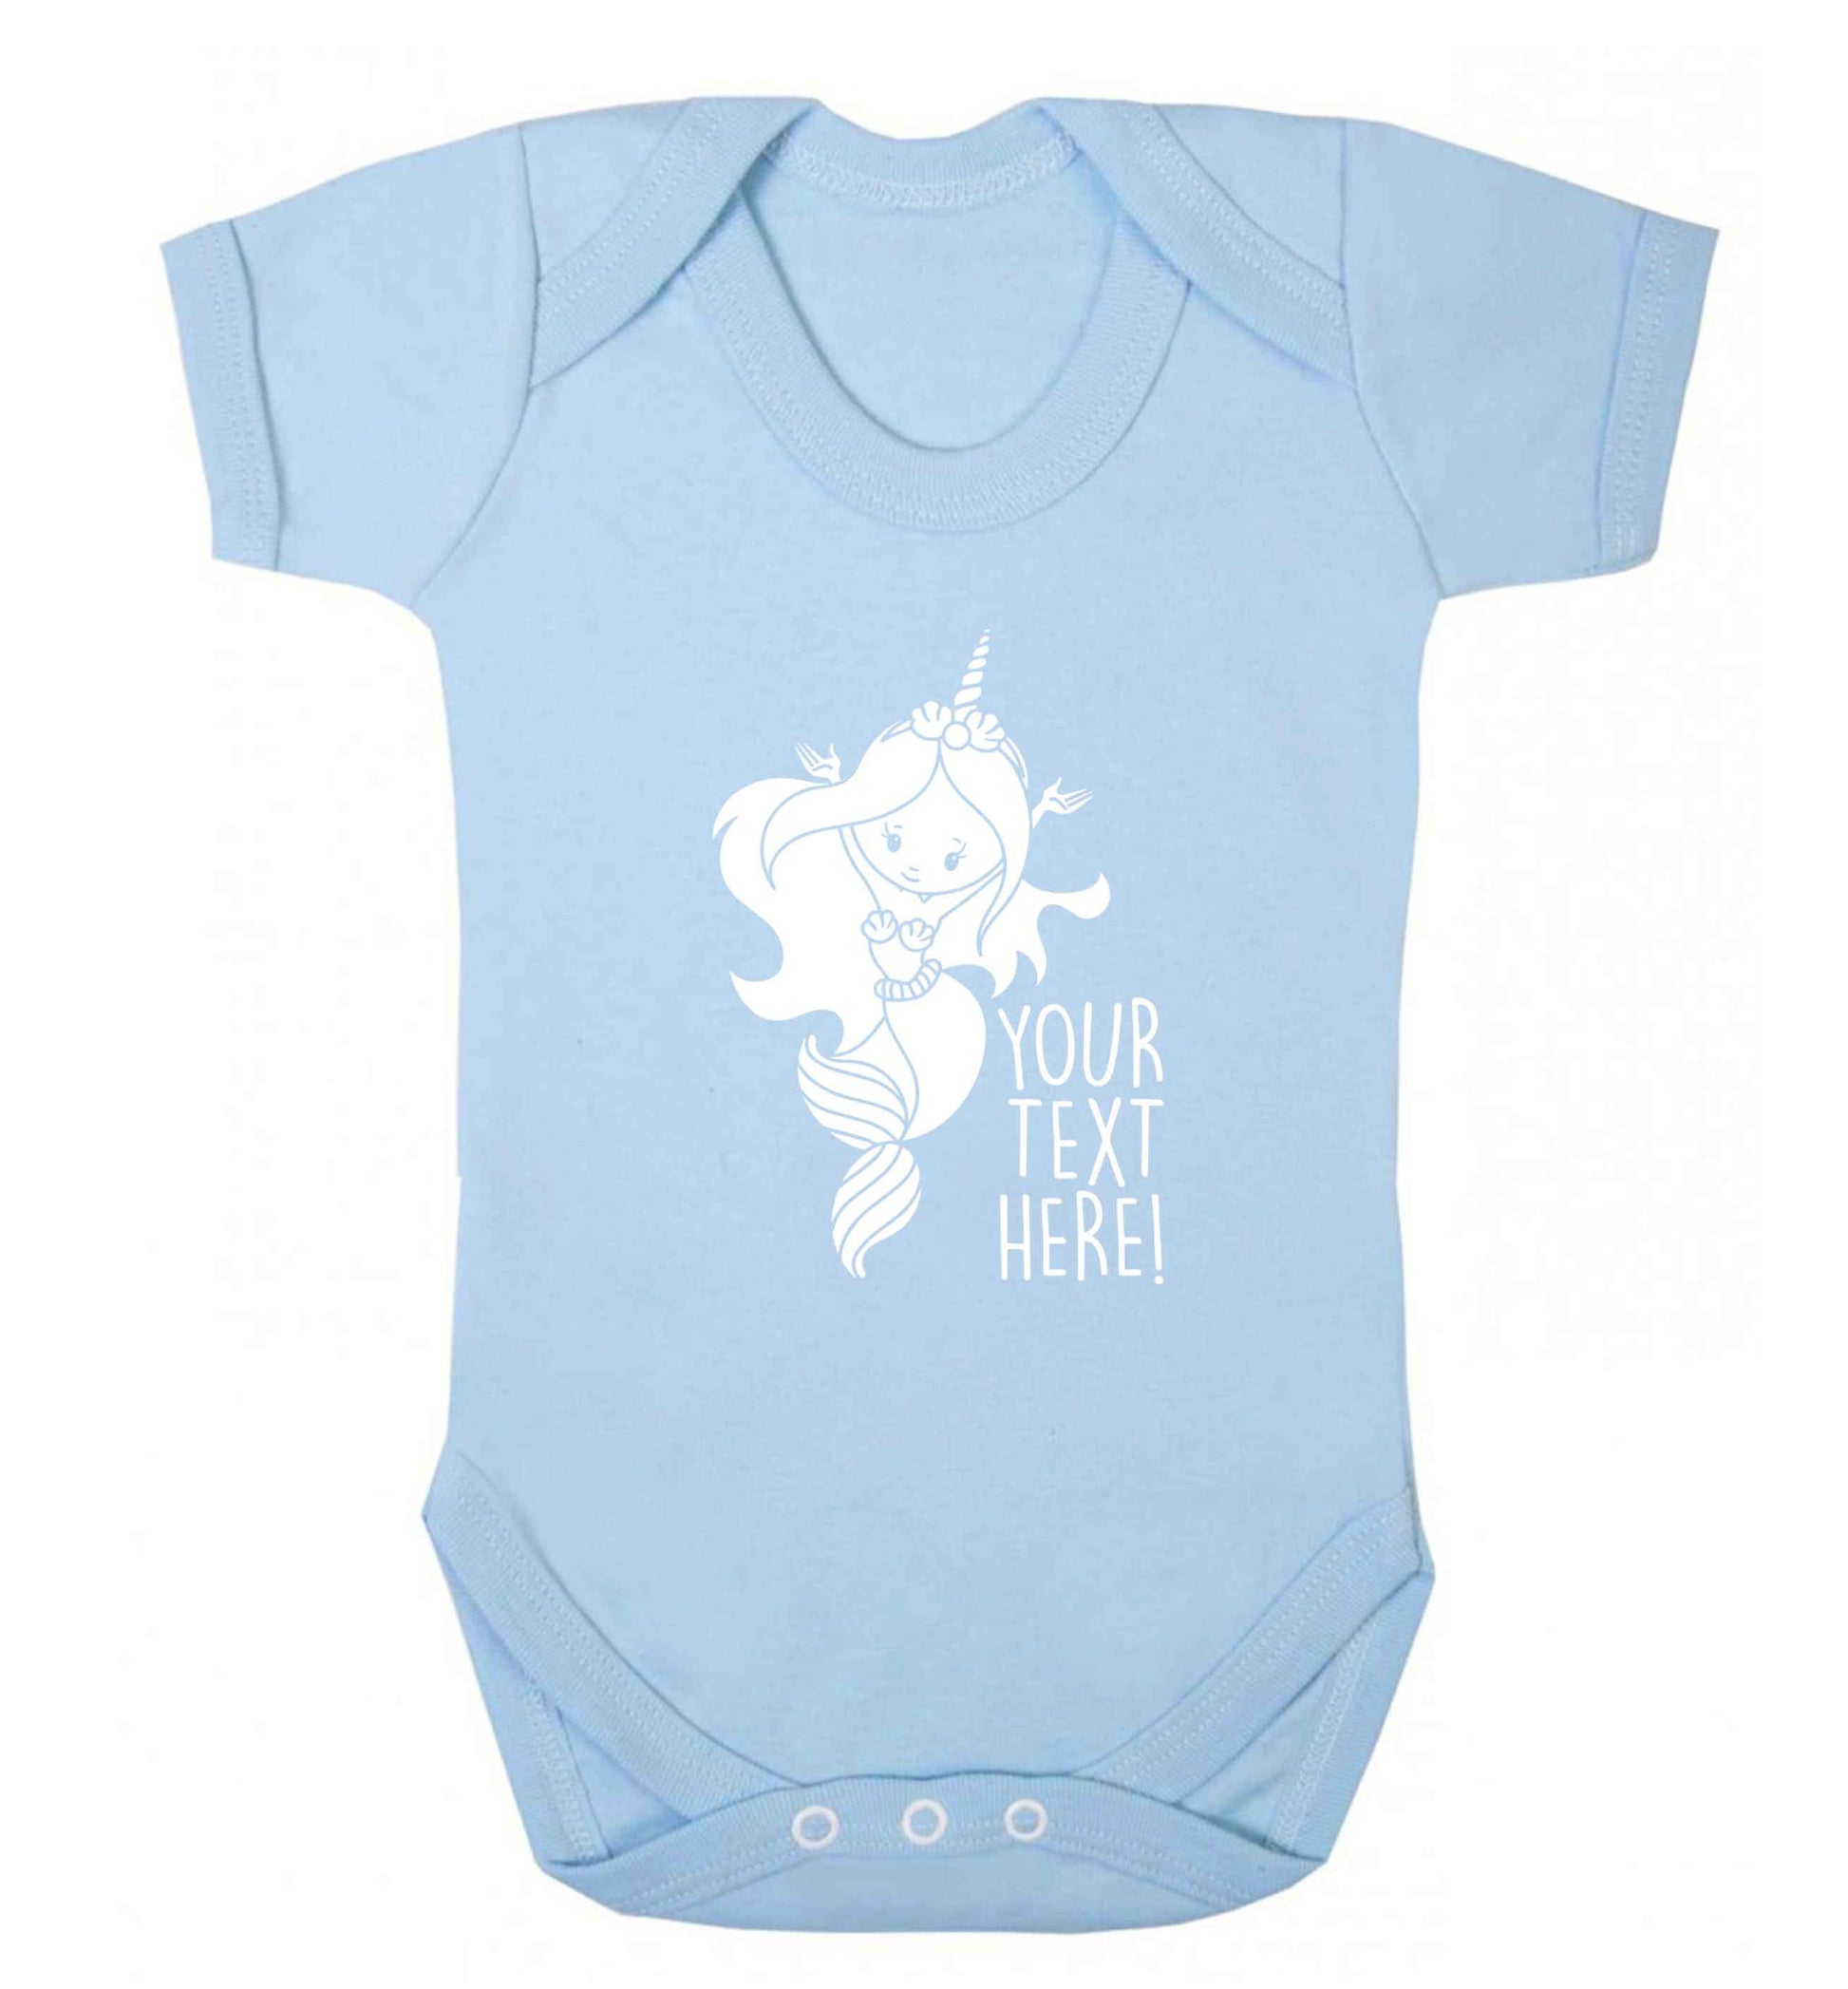 Mermaid with unicorn headband any text baby vest pale blue 18-24 months